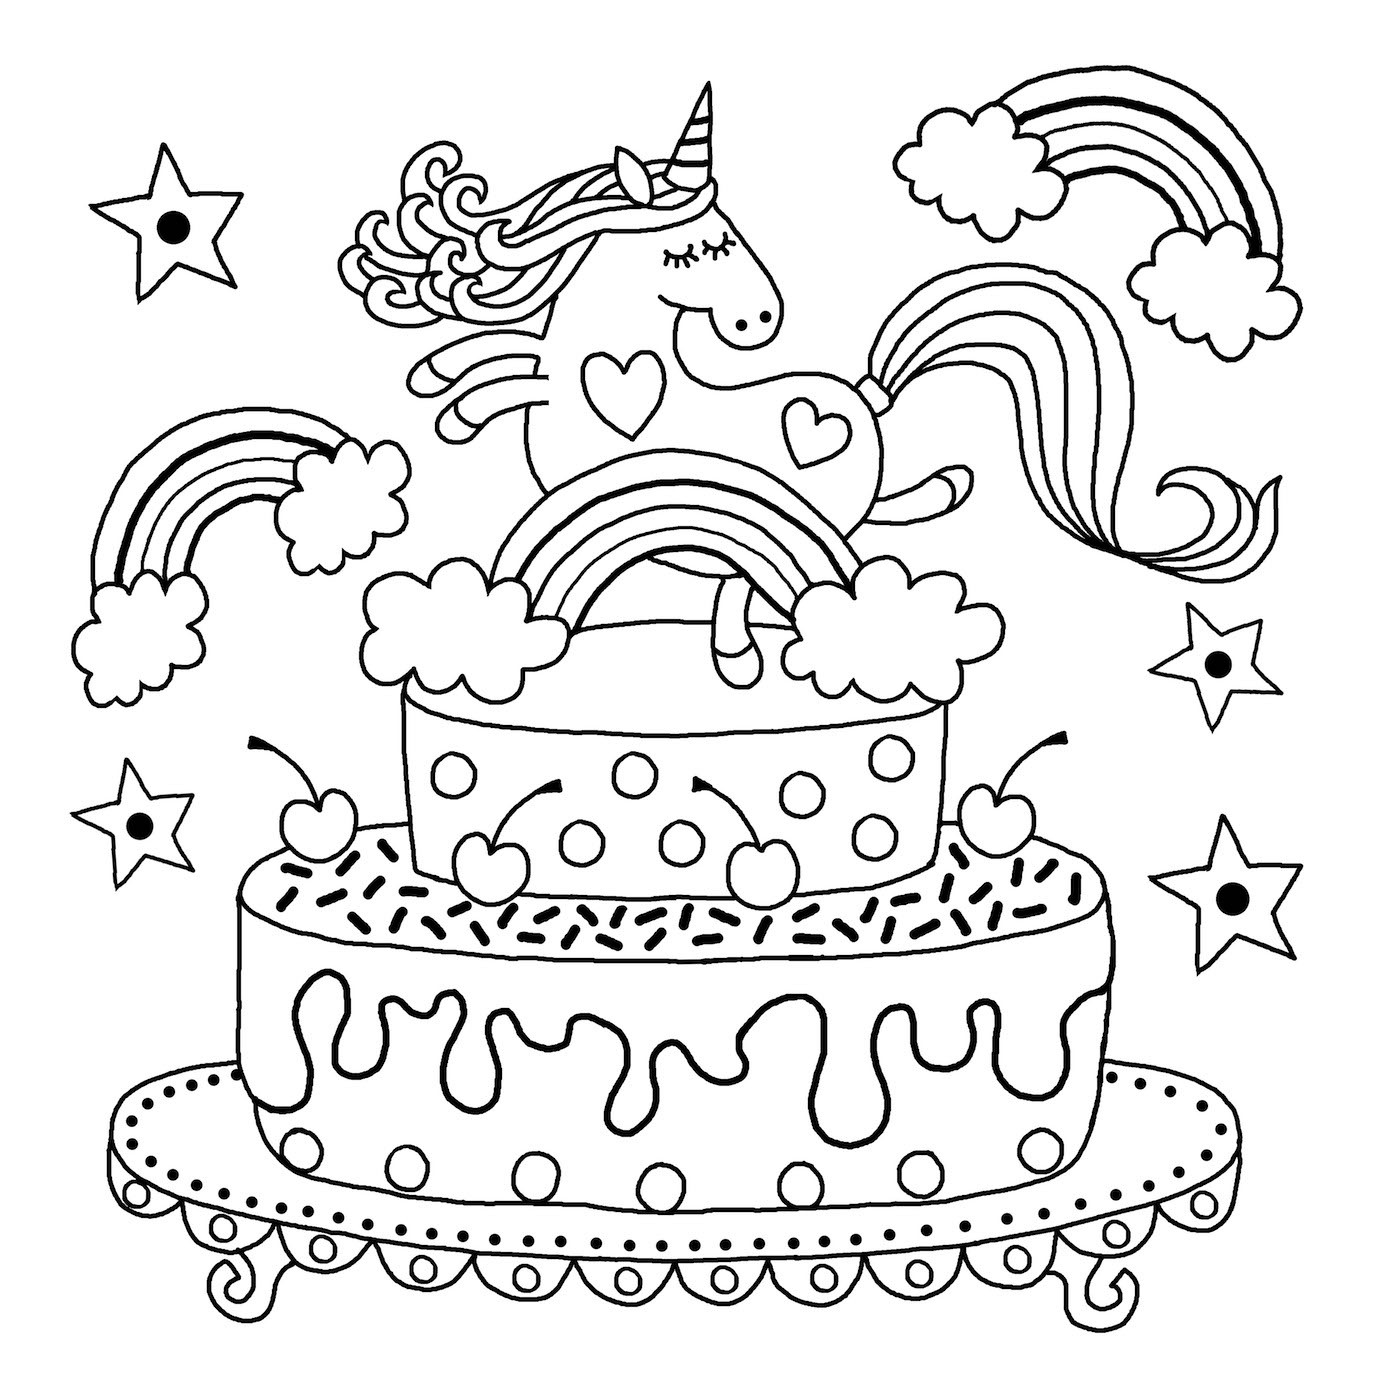 Printable Unicorn Coloring Pages Boys
 Downloadable unicorn colouring page Michael O Mara Books